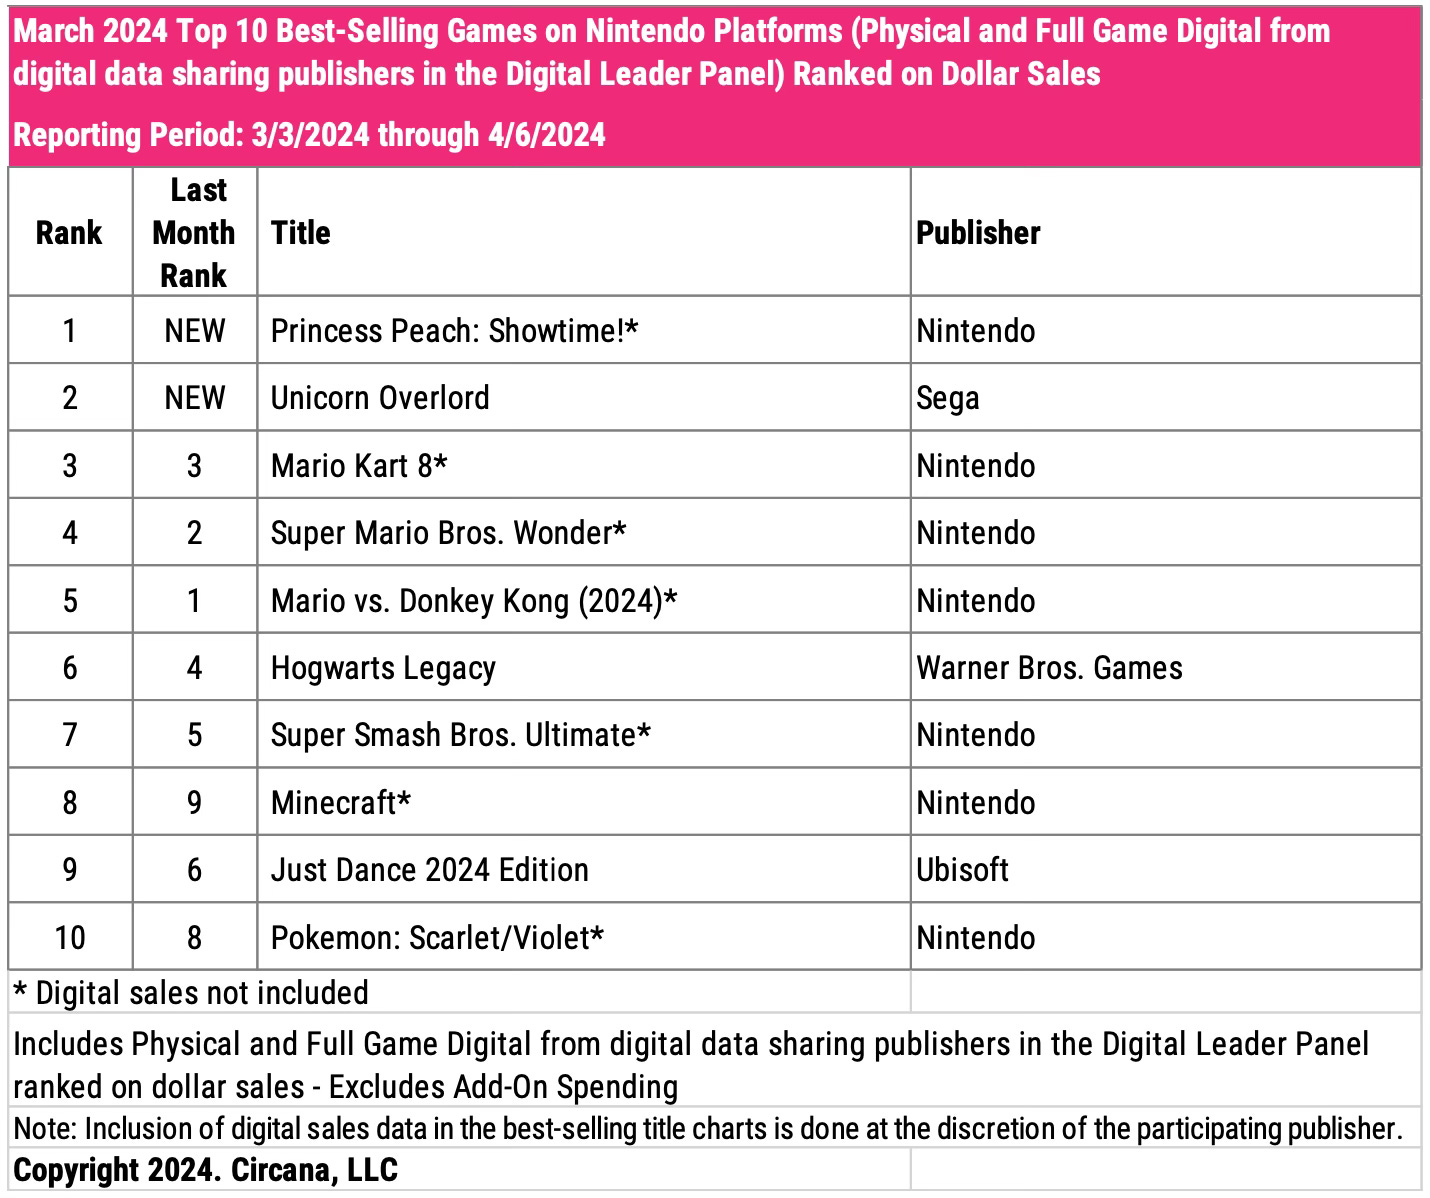 Chart showing the Top 10 Best-Selling Games on Nintendo Platforms in March 2024